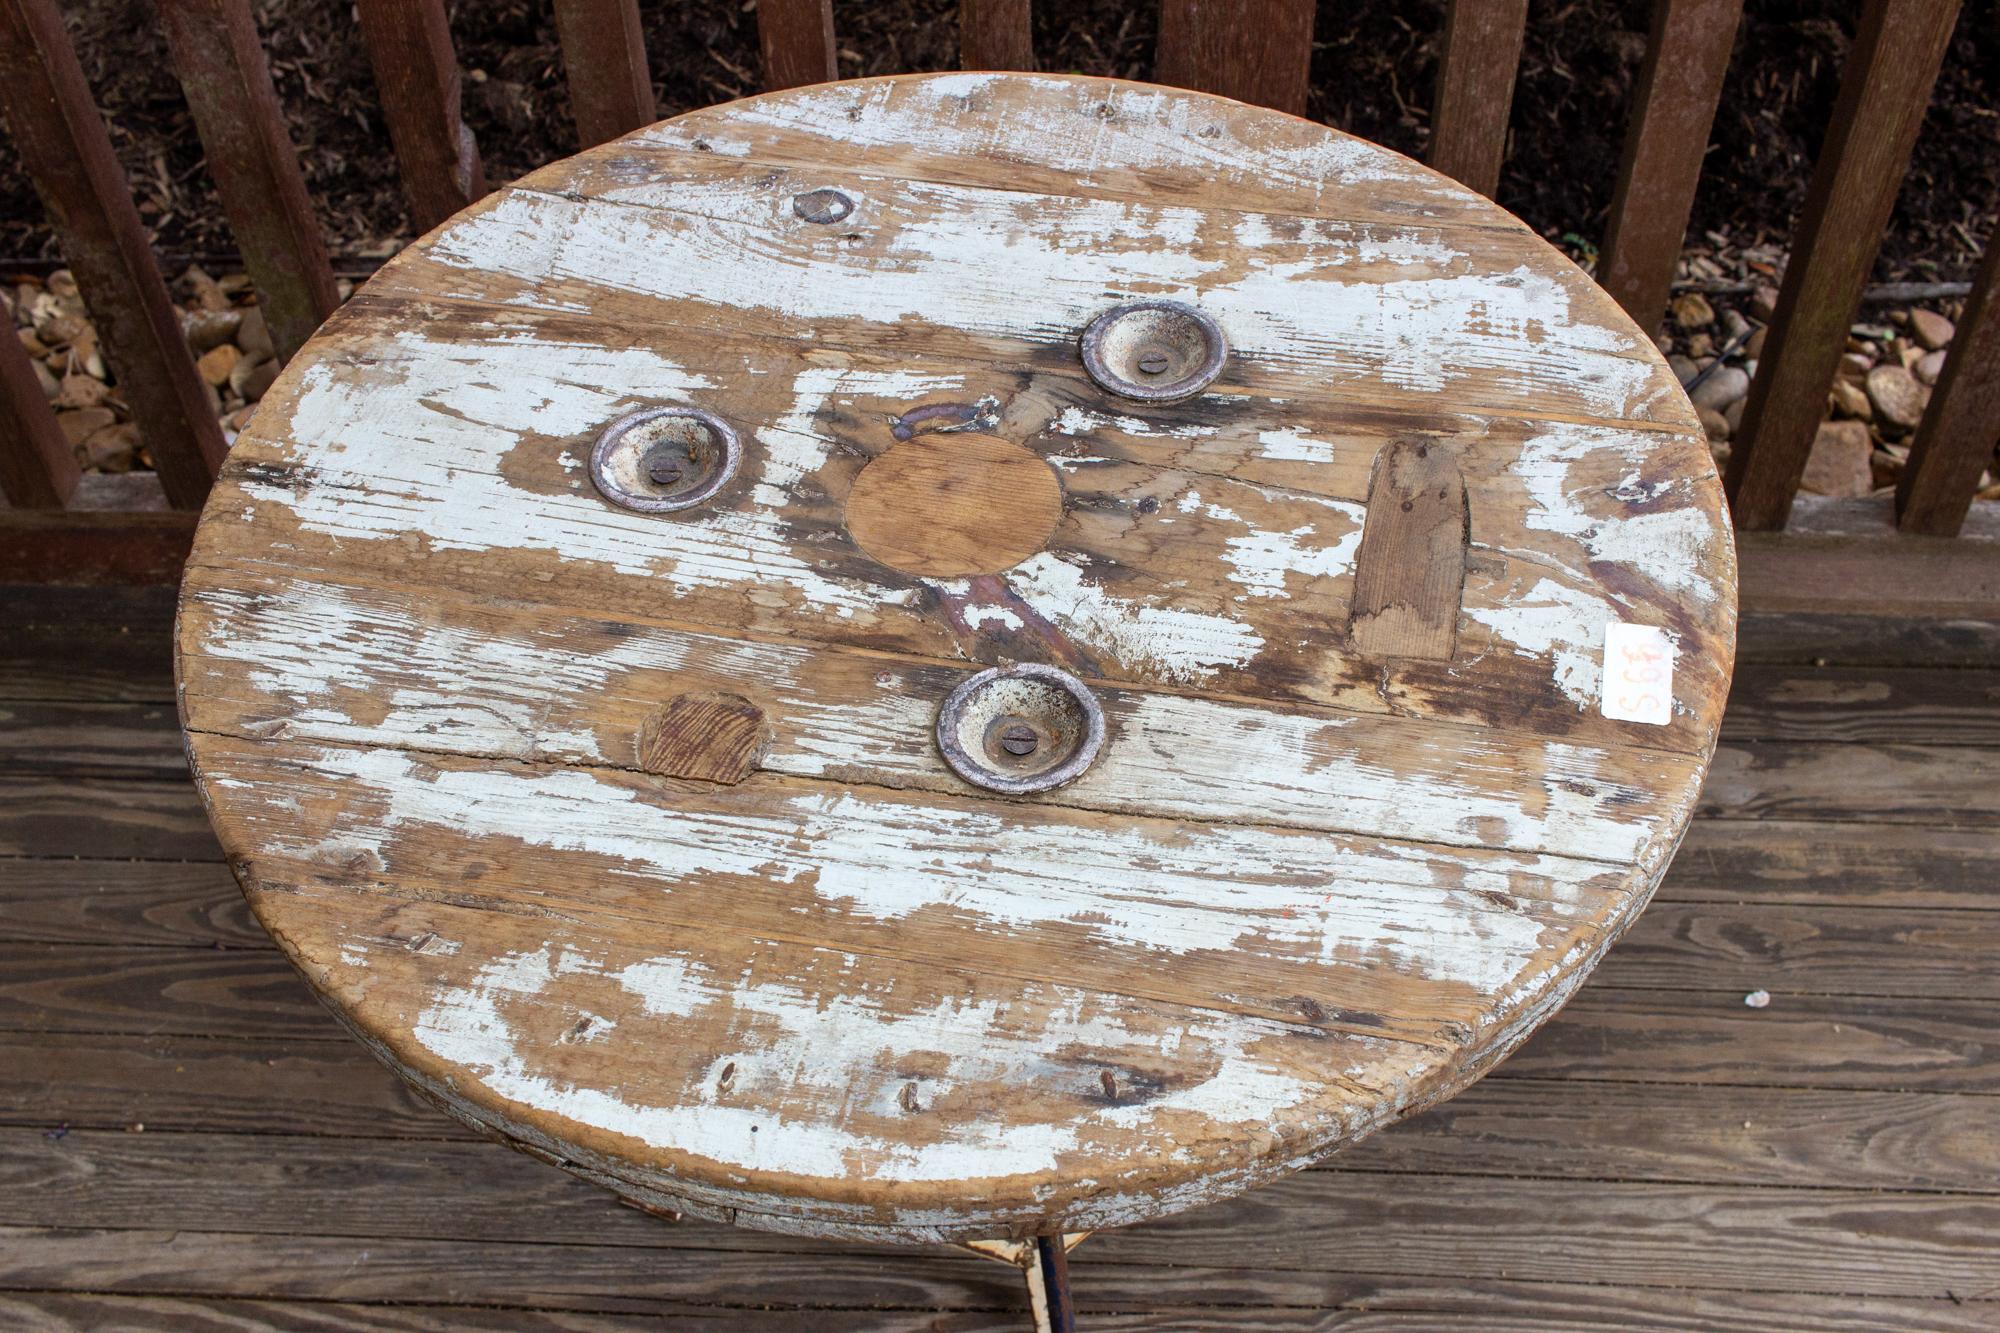 Spanish Antique Wood & Metal Bistro Table Found in Spain